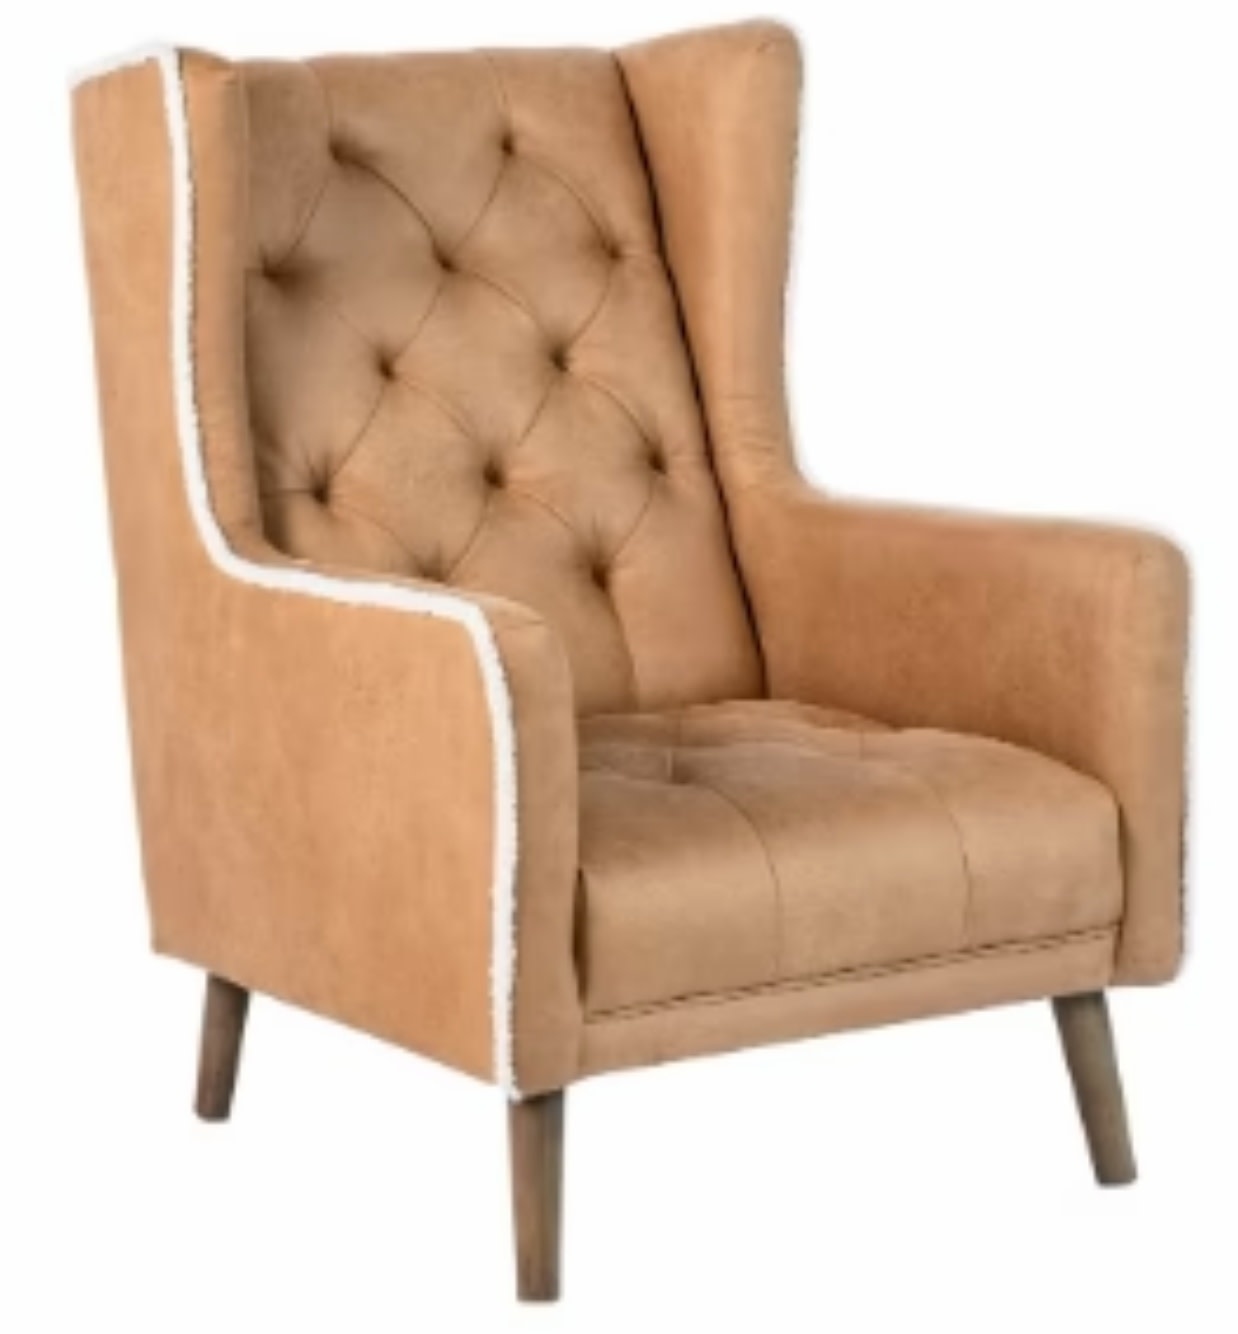 Lansing Accent Chair, Vegan Leather 29 x 36 x 42, Furniture Available for Local Delivery or Pick Up